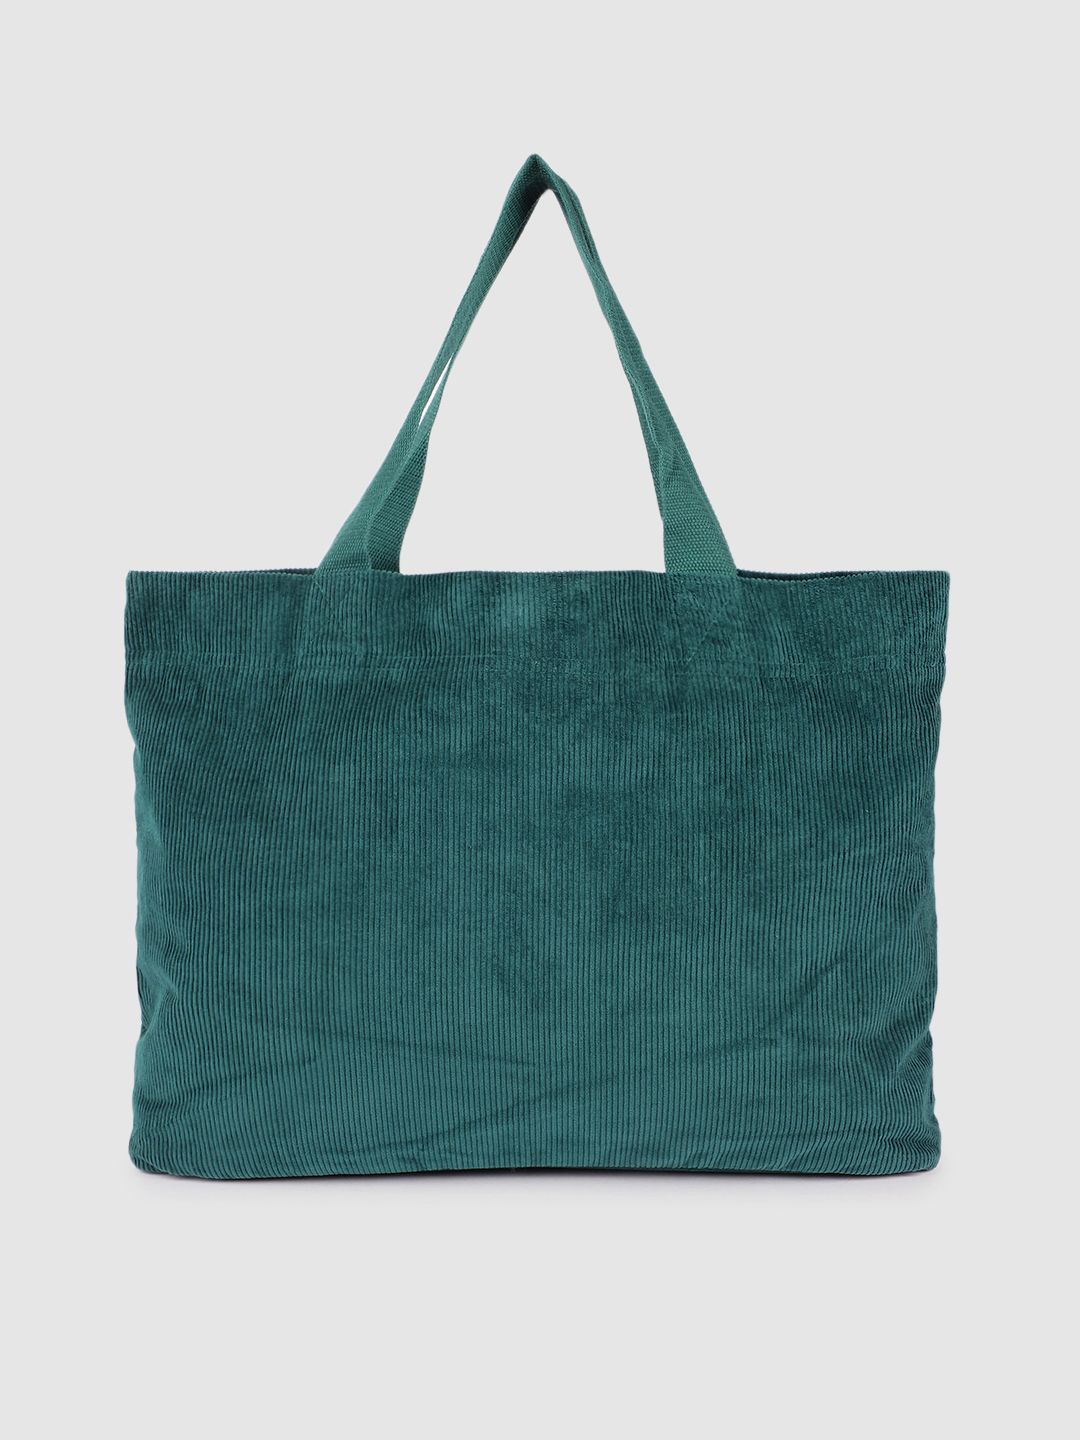 Accessorize Women Teal Structured Tote Bag Price in India